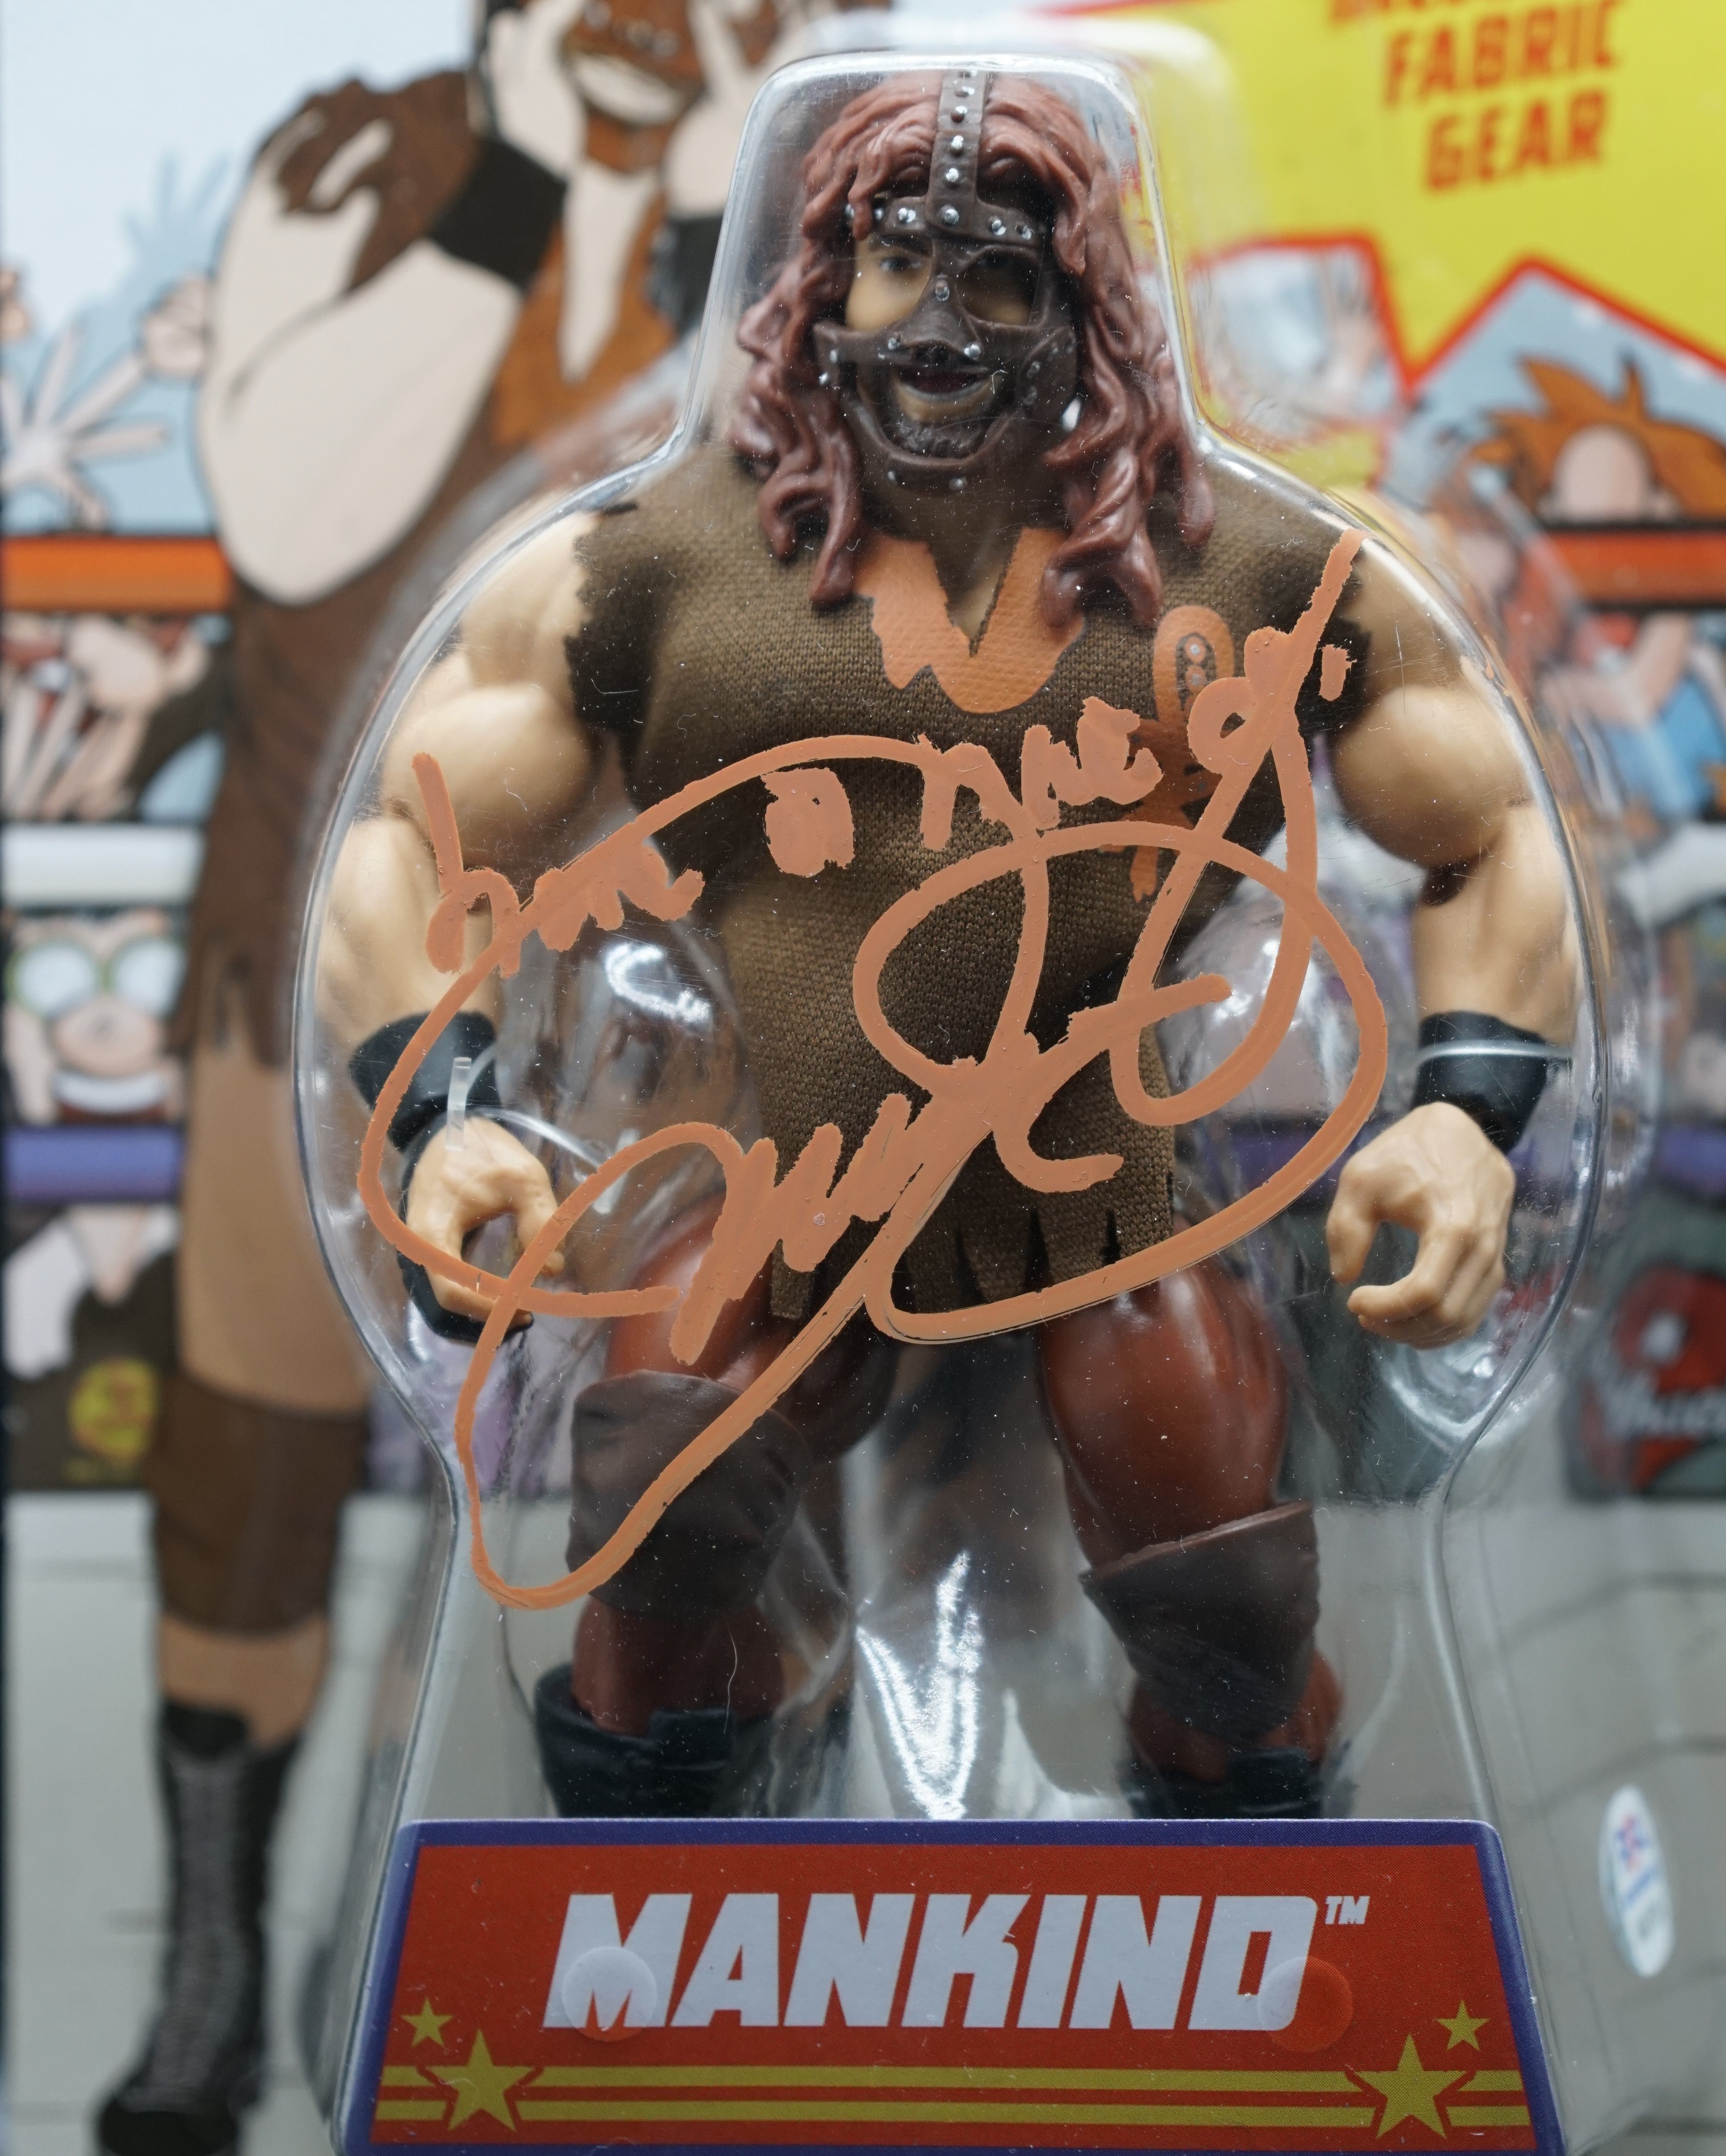 WWE Mankind Retro Superstar Action Figure with Inscription "Have a Nice Day" PSA COA - Signed by Mick Foley